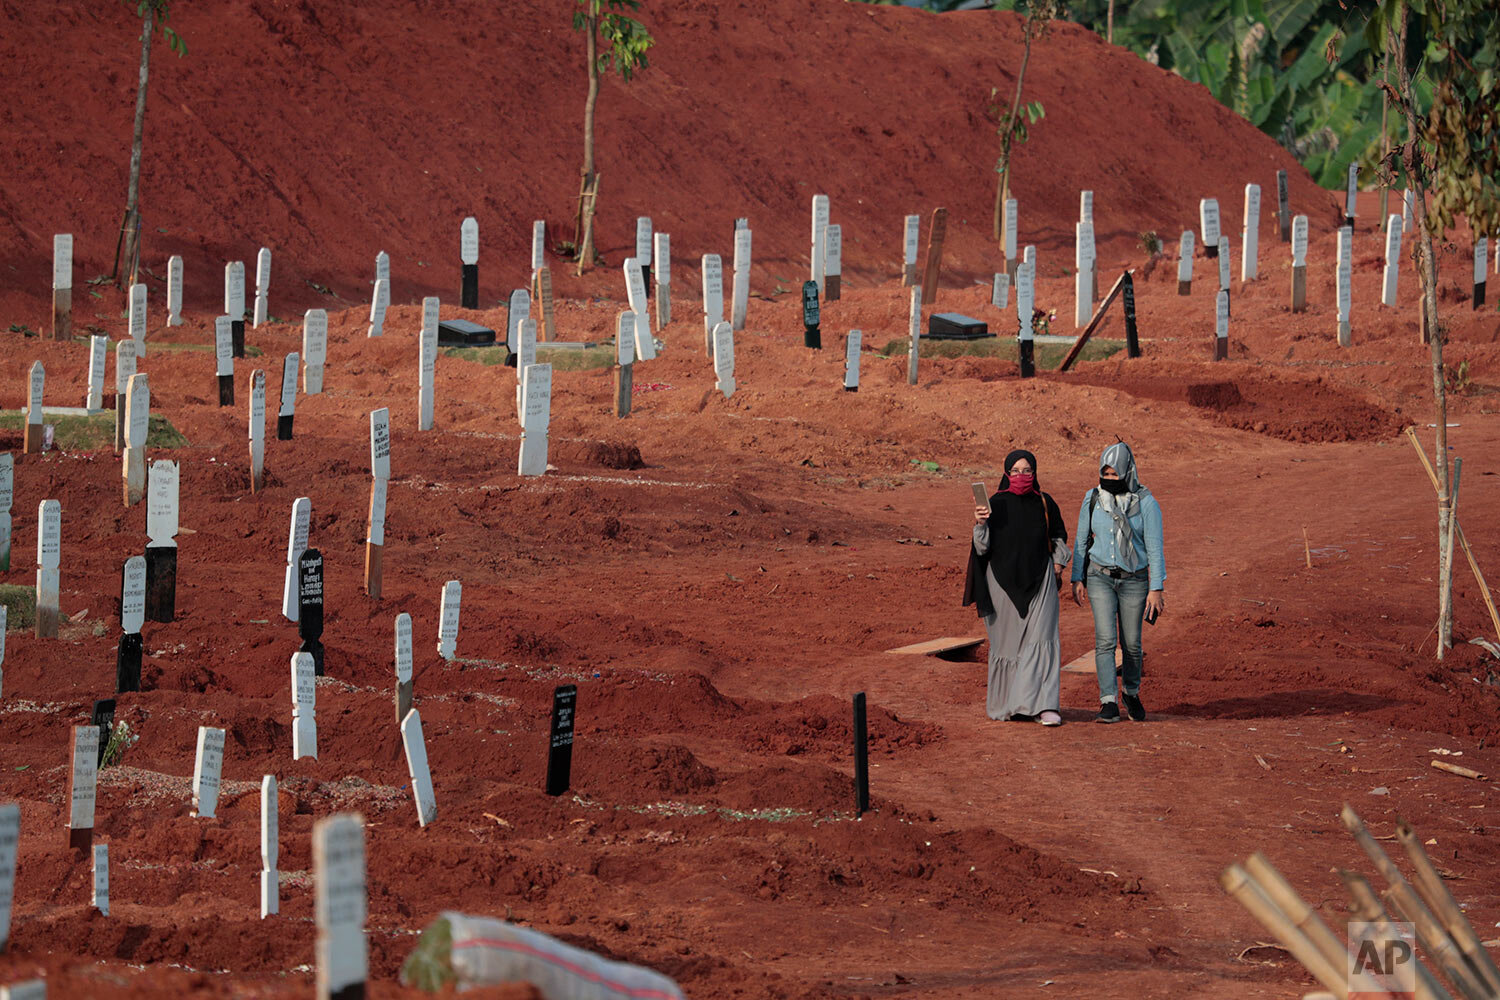  Indonesian Muslim women walk near grave marks at the special section of Pondok Ranggon cemetery which was opened to accommodate the surge in deaths during coronavirus outbreak in Jakarta, Indonesia, Thursday, Sept. 24, 2020. (AP Photo/Dita Alangkara